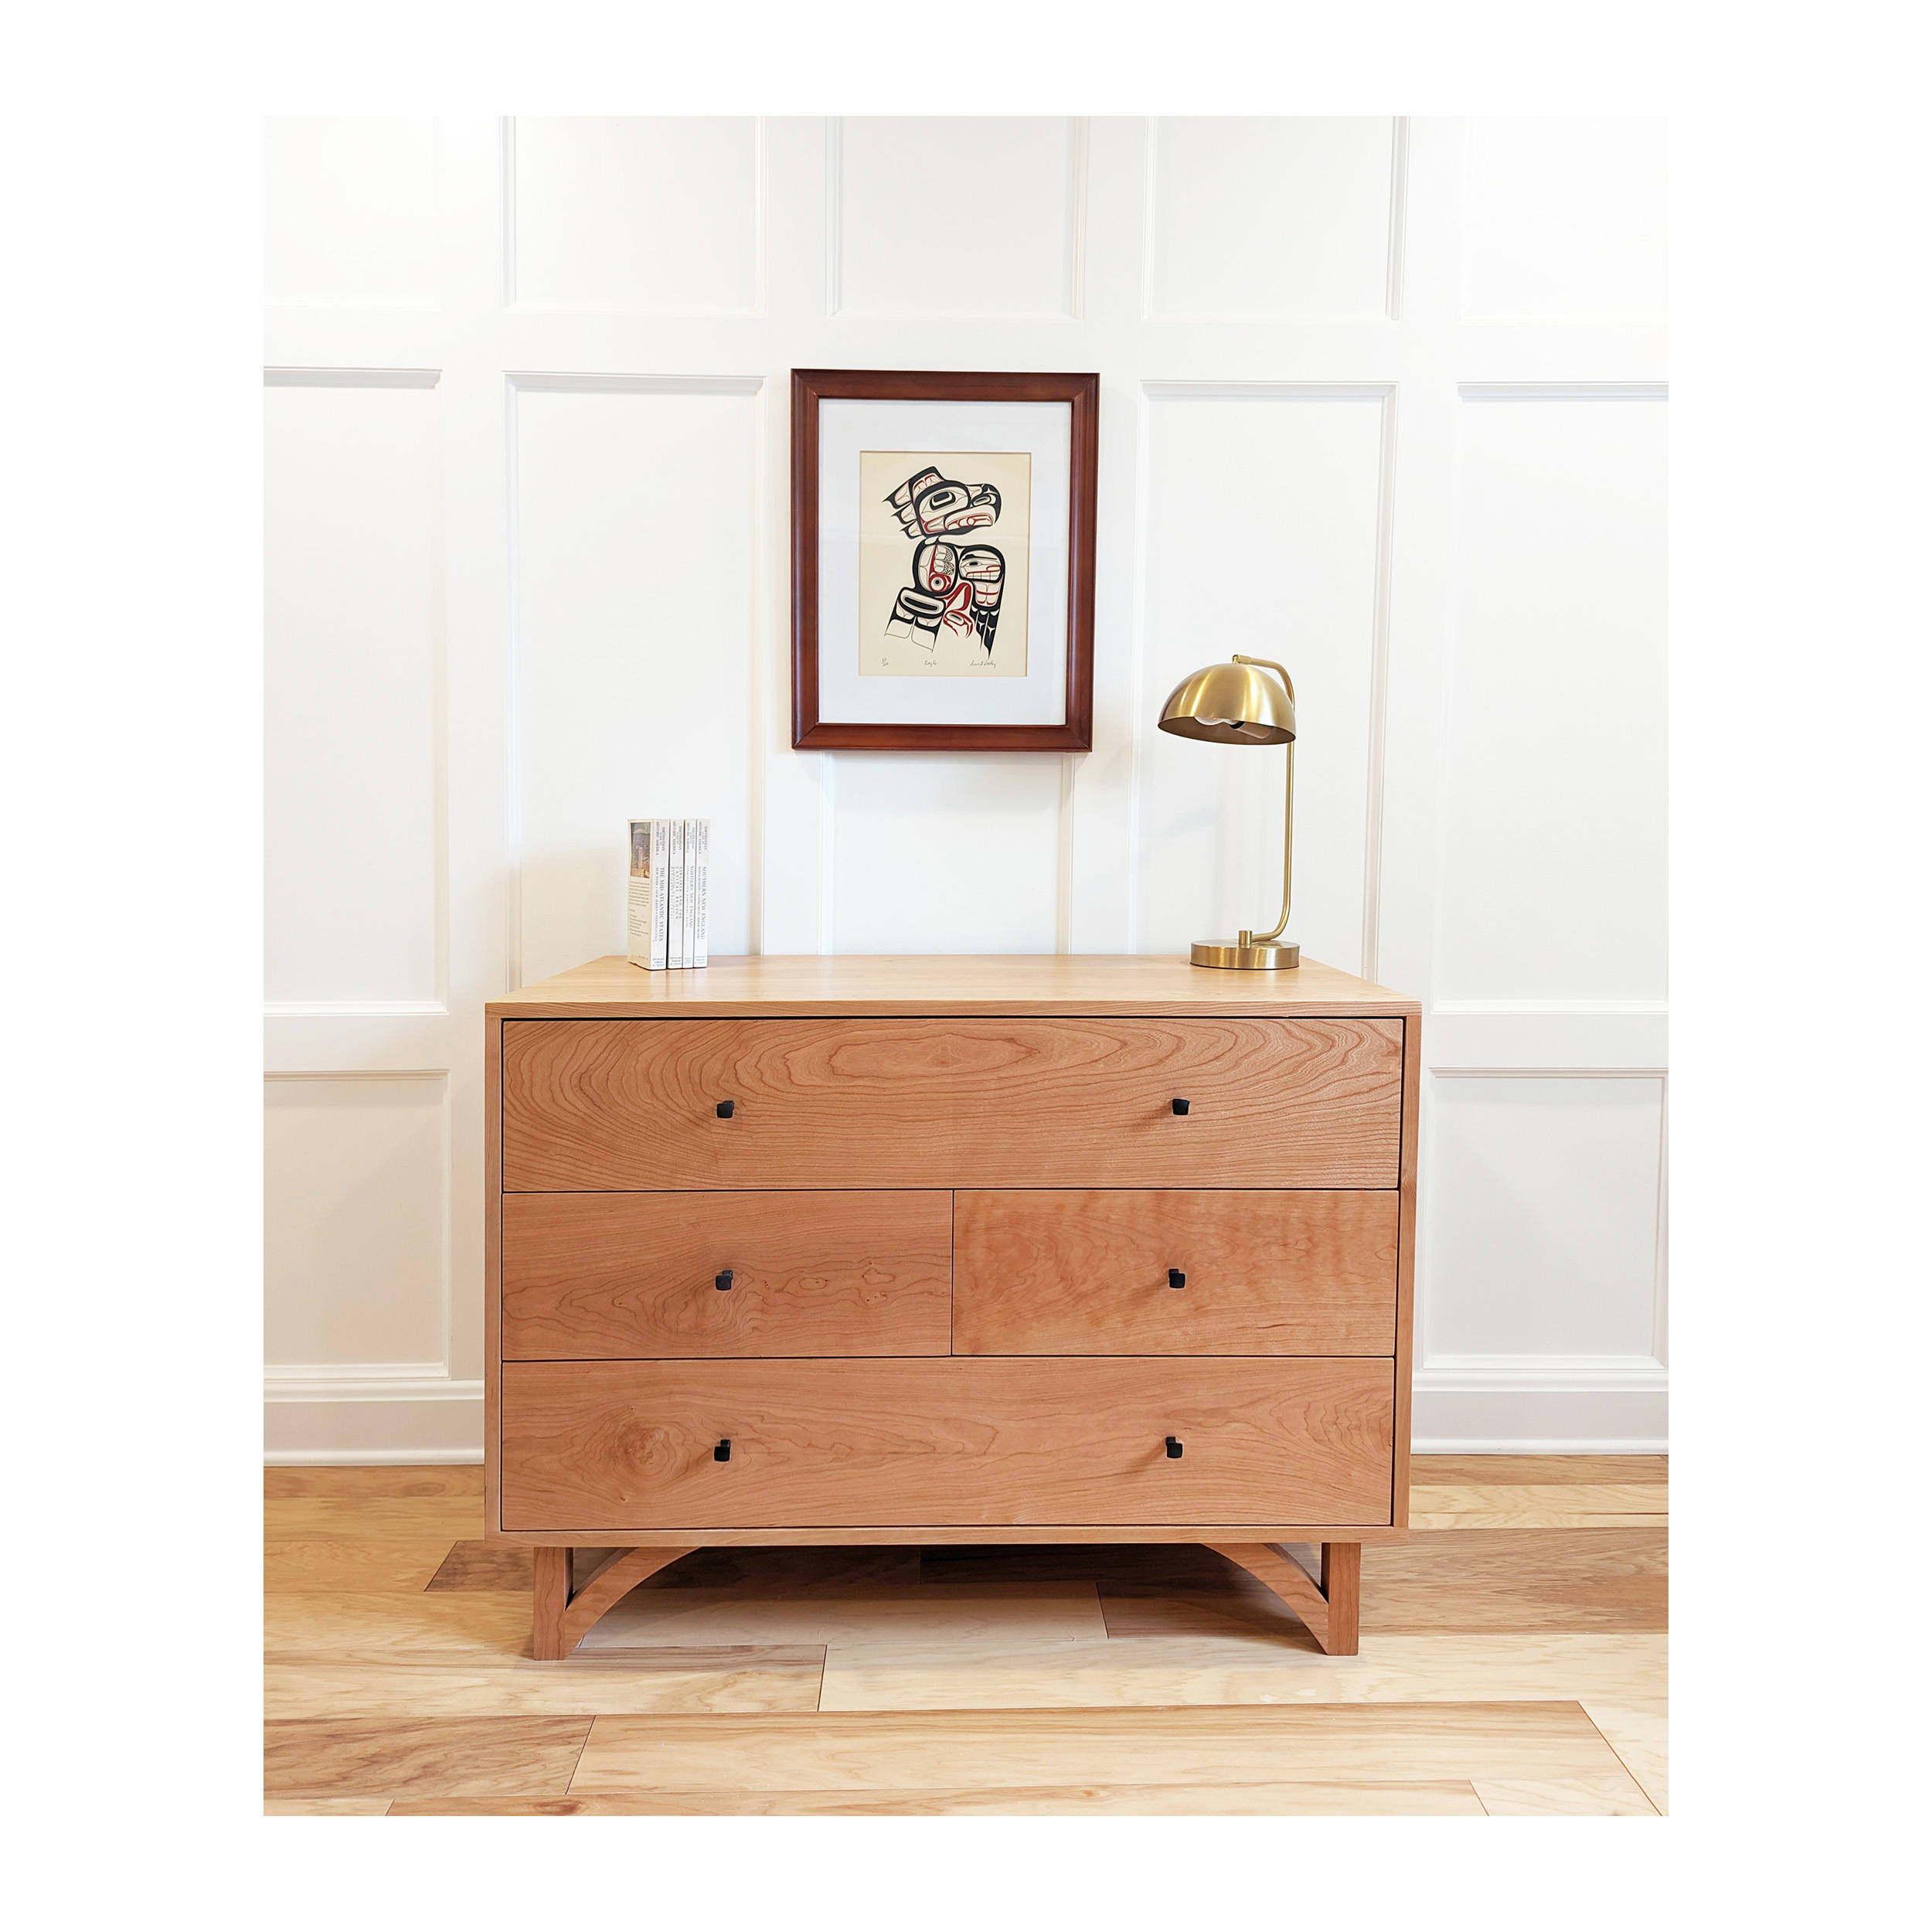 Series 454 Dresser With Four Drawers At 44″ In Width